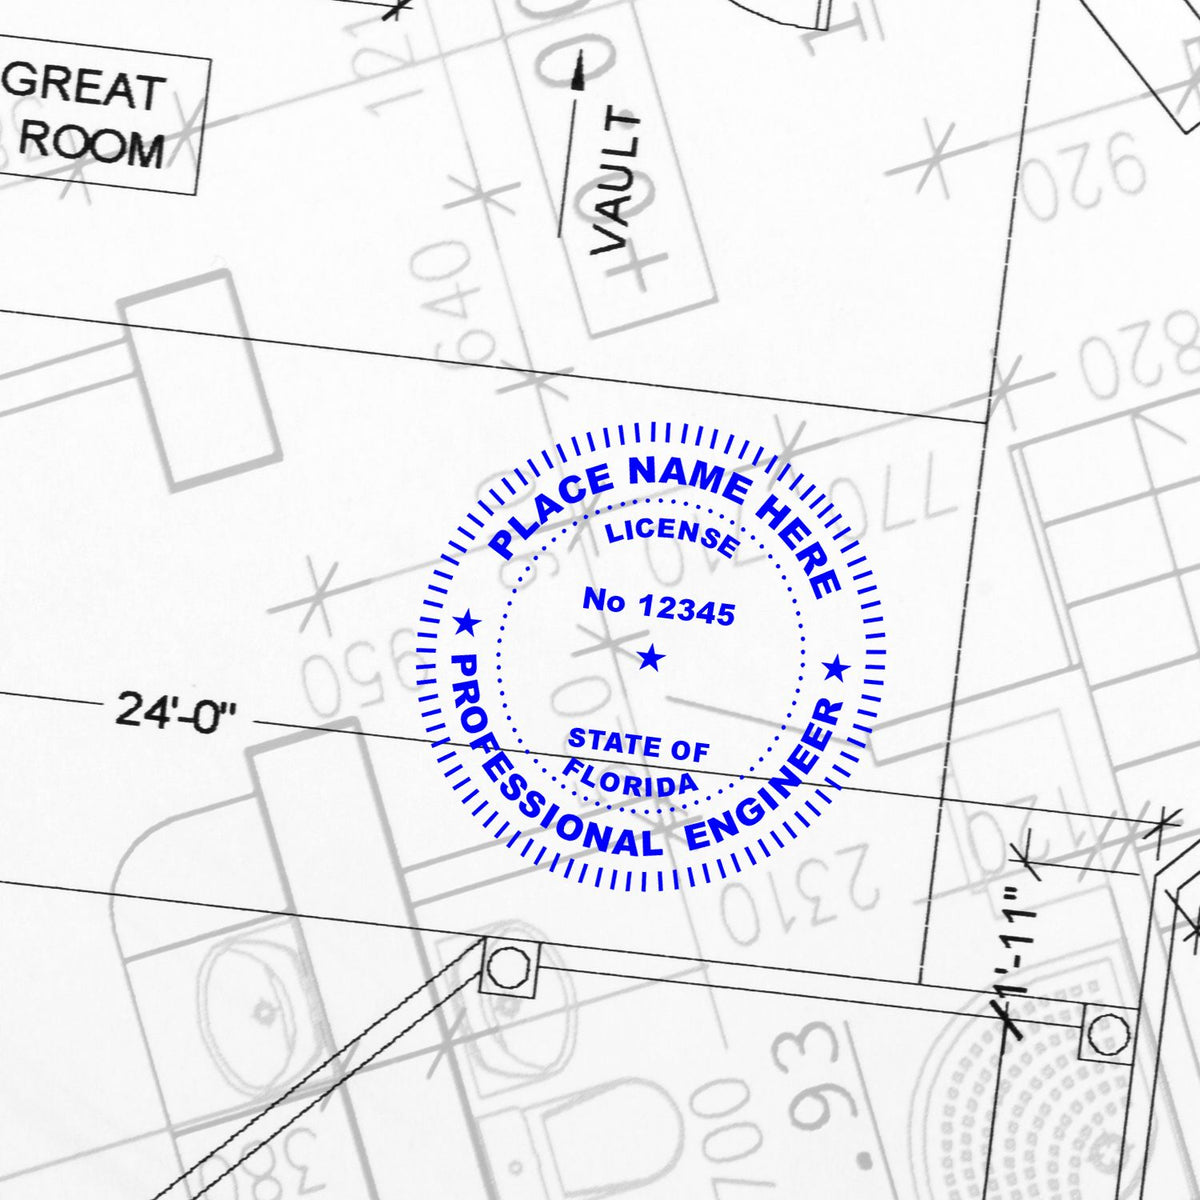 An alternative view of the Premium MaxLight Pre-Inked Florida Engineering Stamp stamped on a sheet of paper showing the image in use